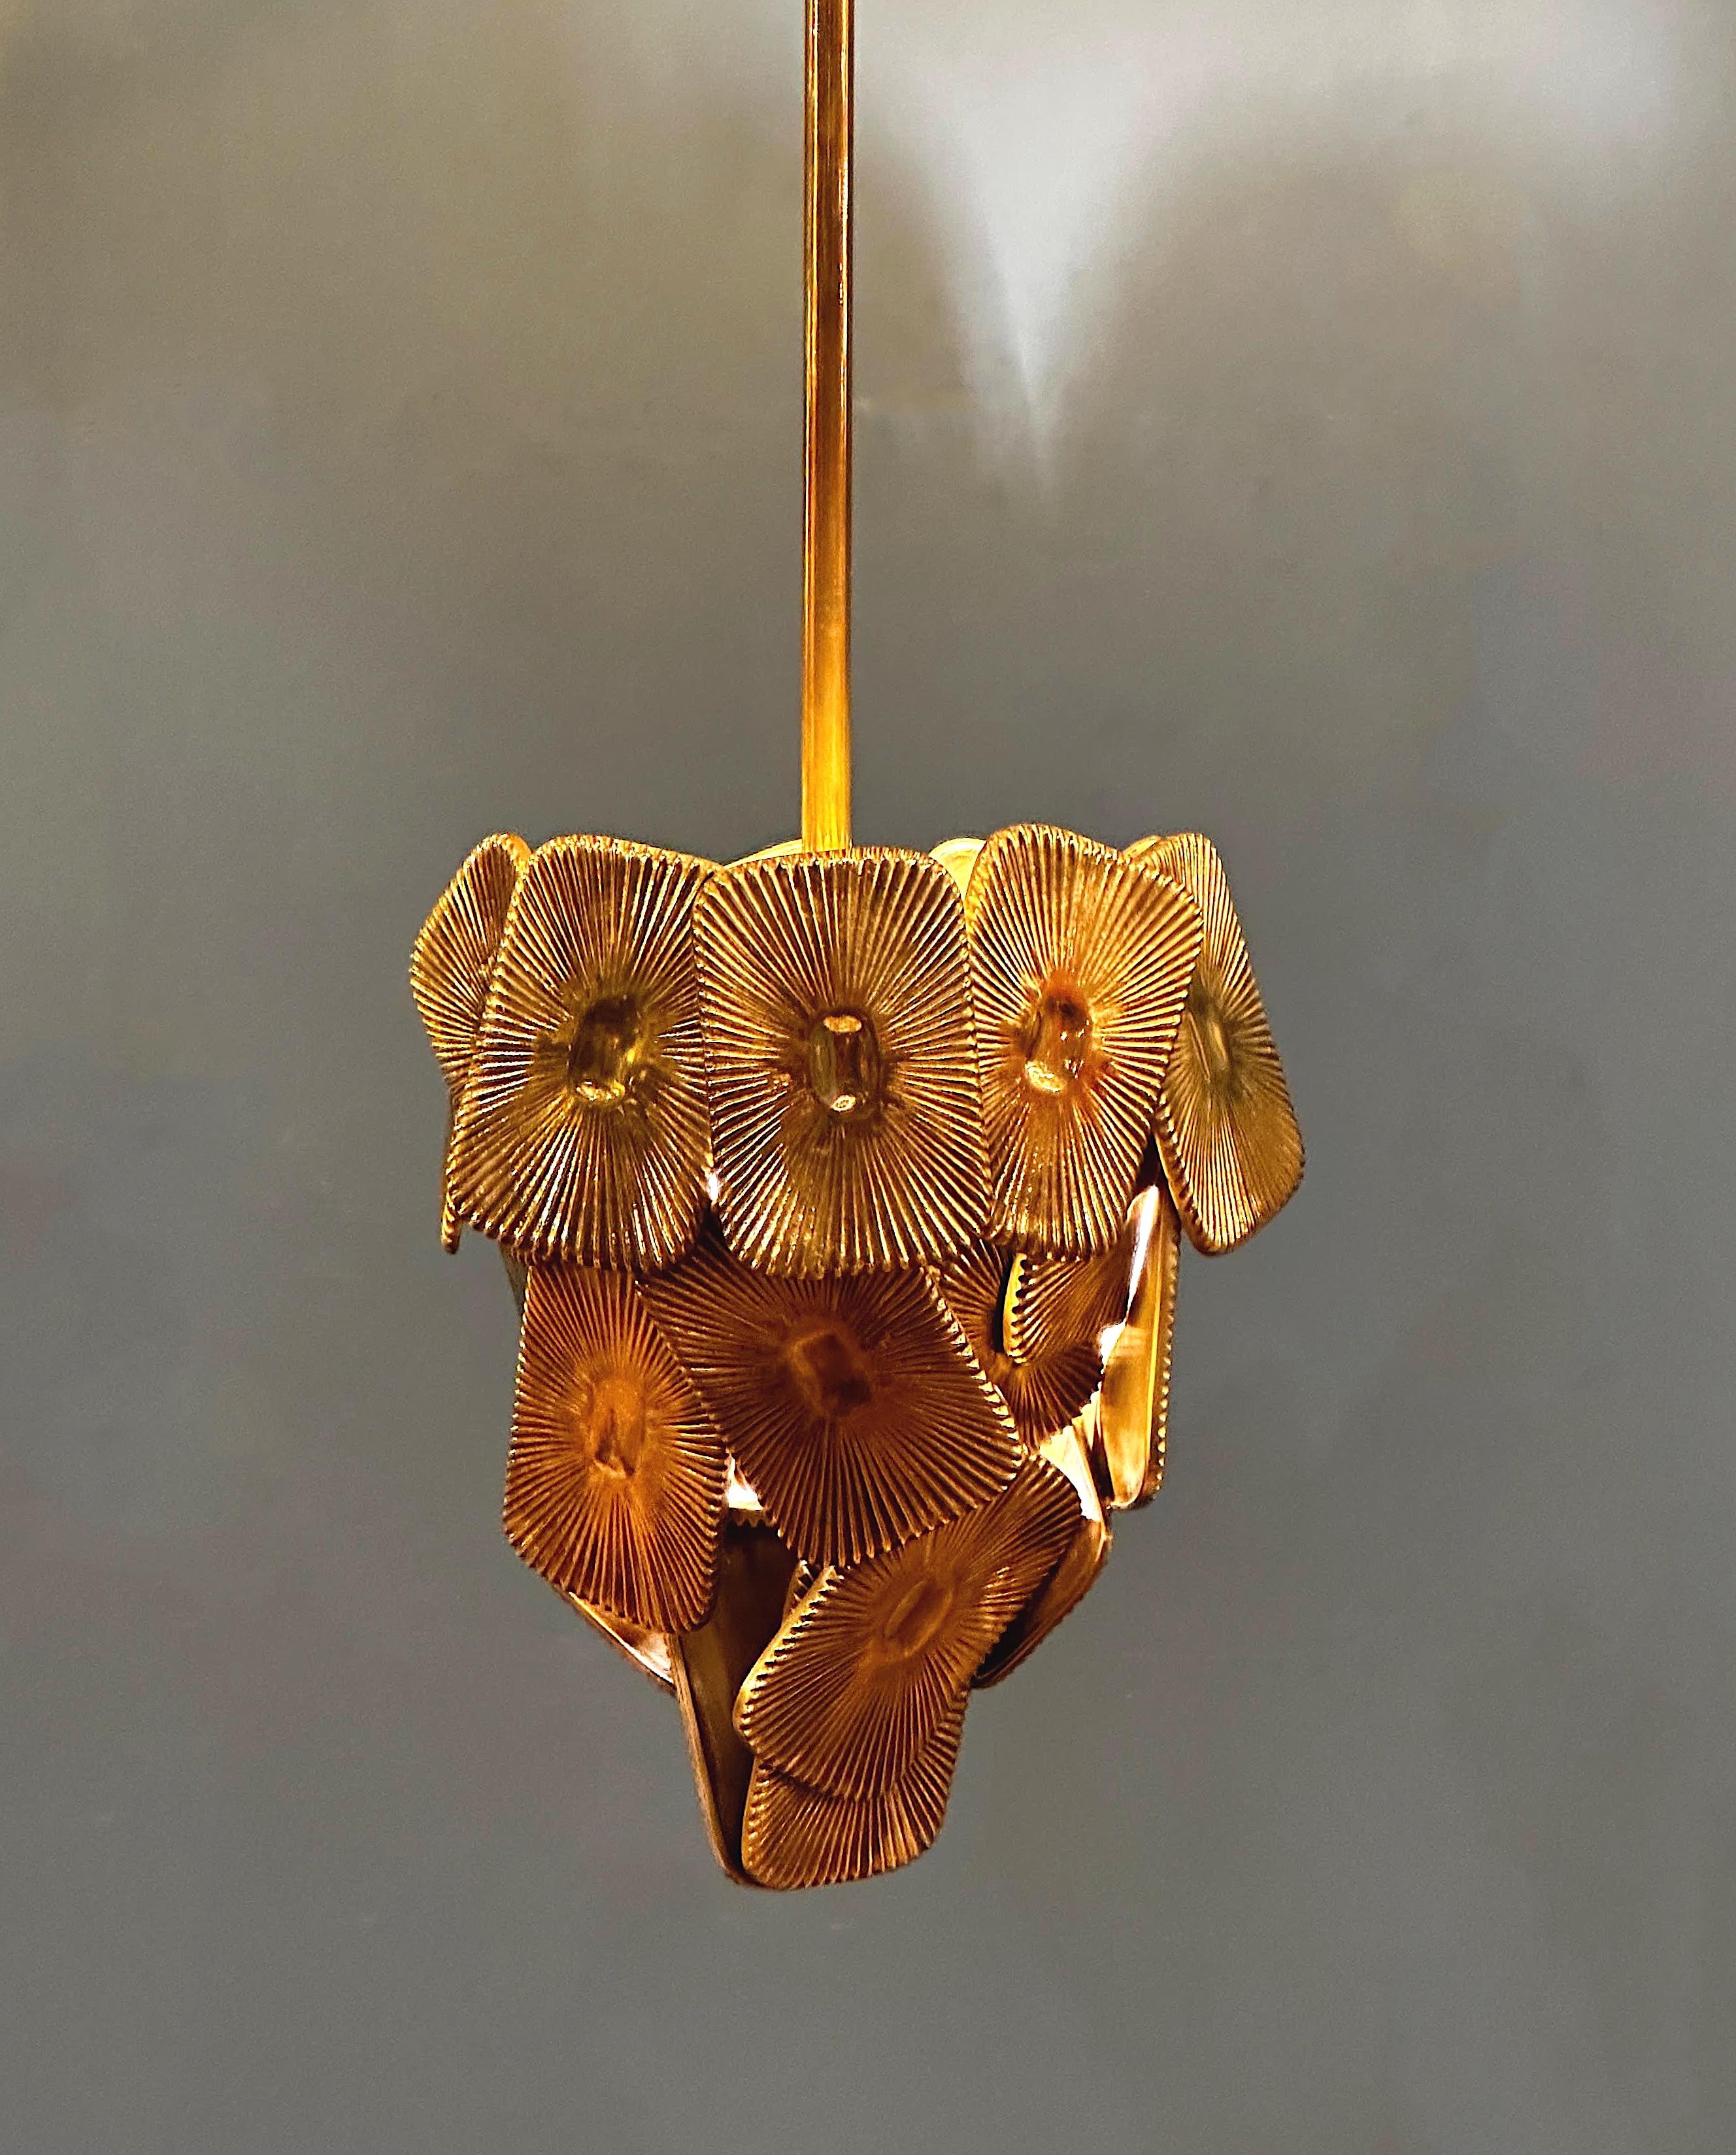 FULGA pendant emerges as a true masterpiece, where artistic ingenuity meets the organic allure of nature. Crafted with precision from a cluster of brass casting floral-inspired pieces, this pendant transforms into an artistic conic masterpiece. Each